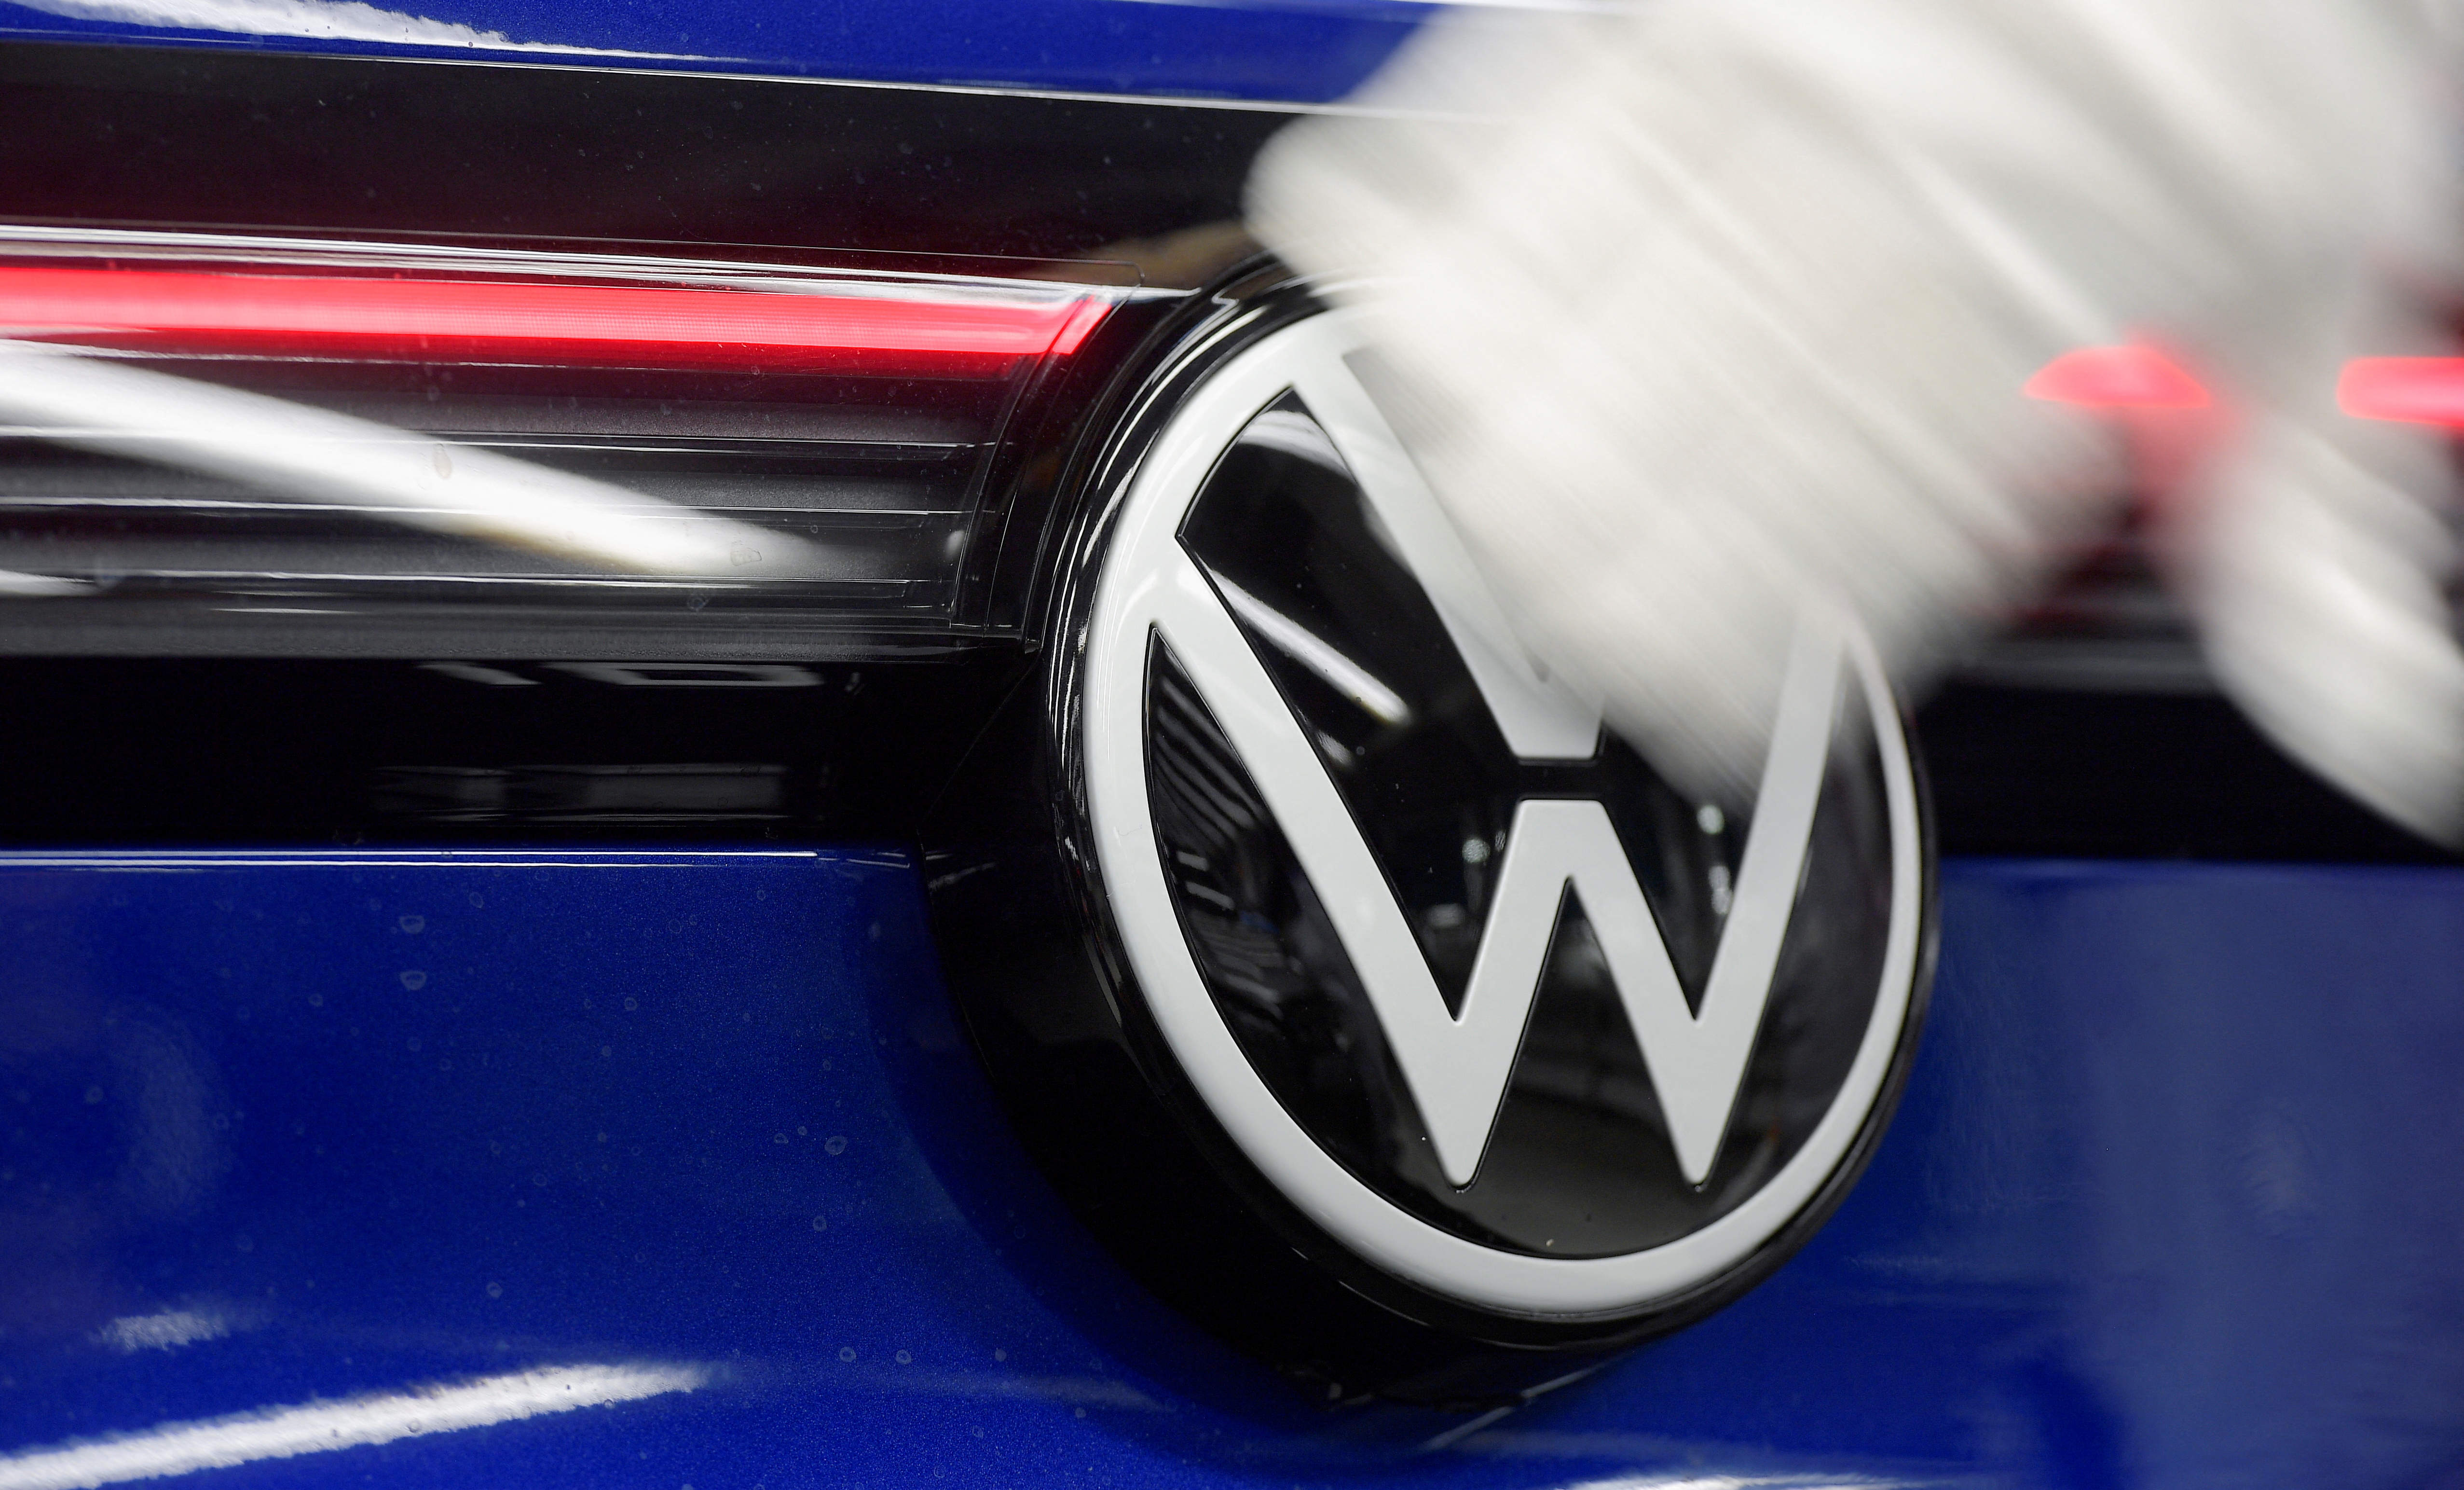 A technician cleans a Volkswagen logo at the production line for electric car models of the Volkswagen Group, in Zwickau